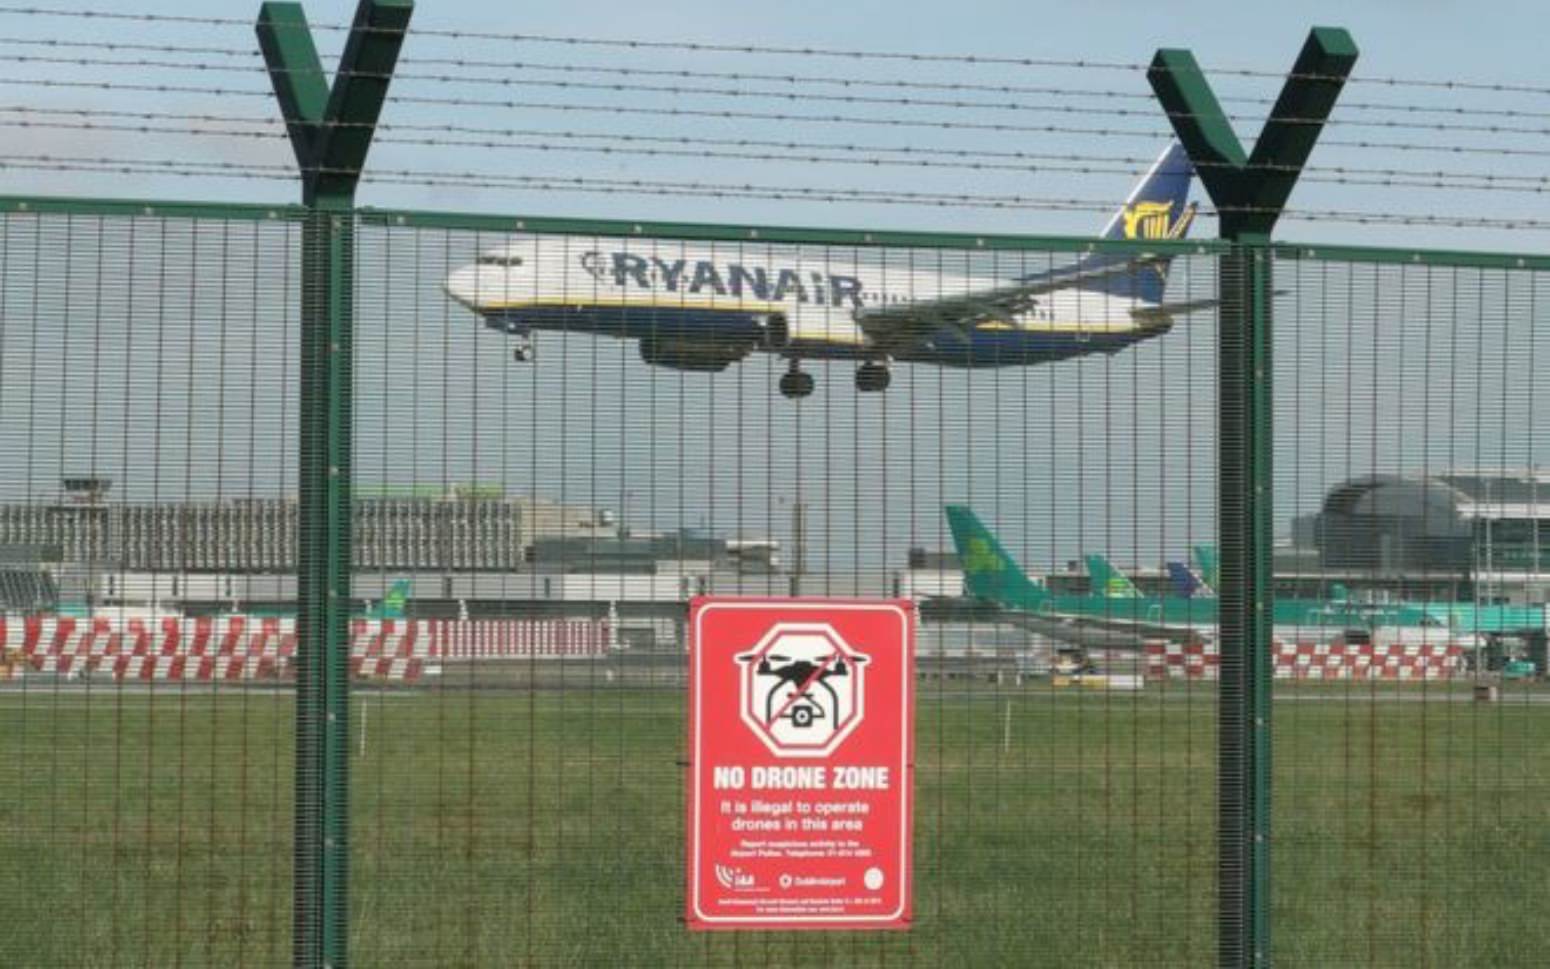 Dublin Airport flights halted after absolute definite sighting of a drone